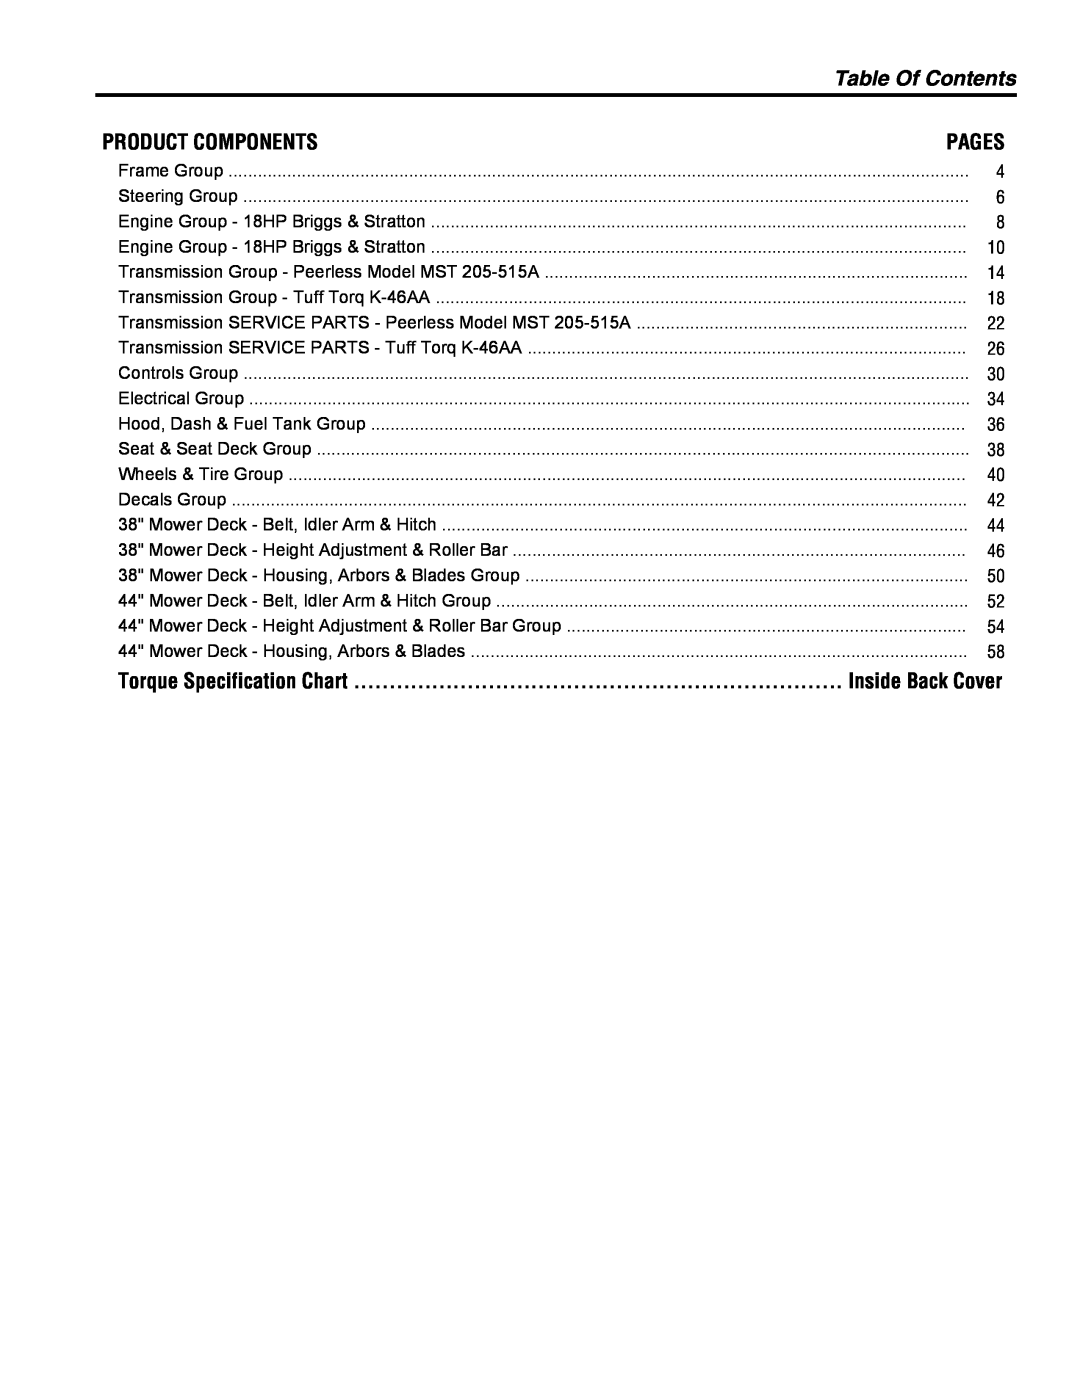 Snapper 2500 Series manual Table Of Contents, Product Components, Pages, Torque Specification Chart 